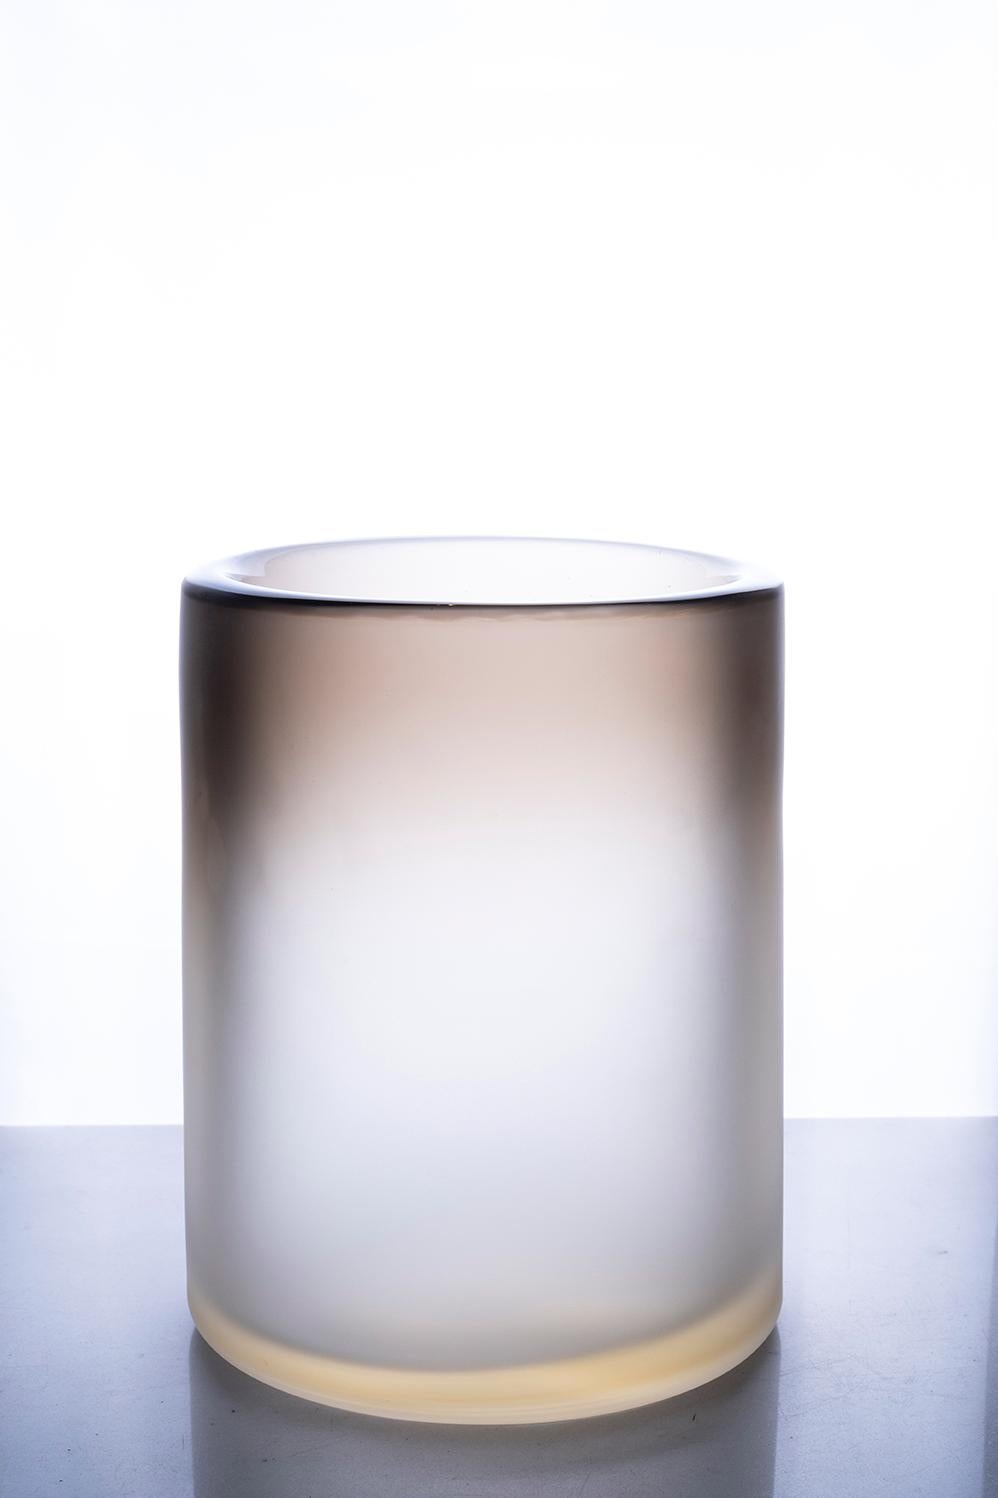 Cilindro small Satin-shaded finish vase, Murano glass, by Federico Peri, 21st century.
Cilindro is a vase from the Essentials collection designed by Federico Peri for Purho in spring 2021.
Created from the starting-point of an oval and conical